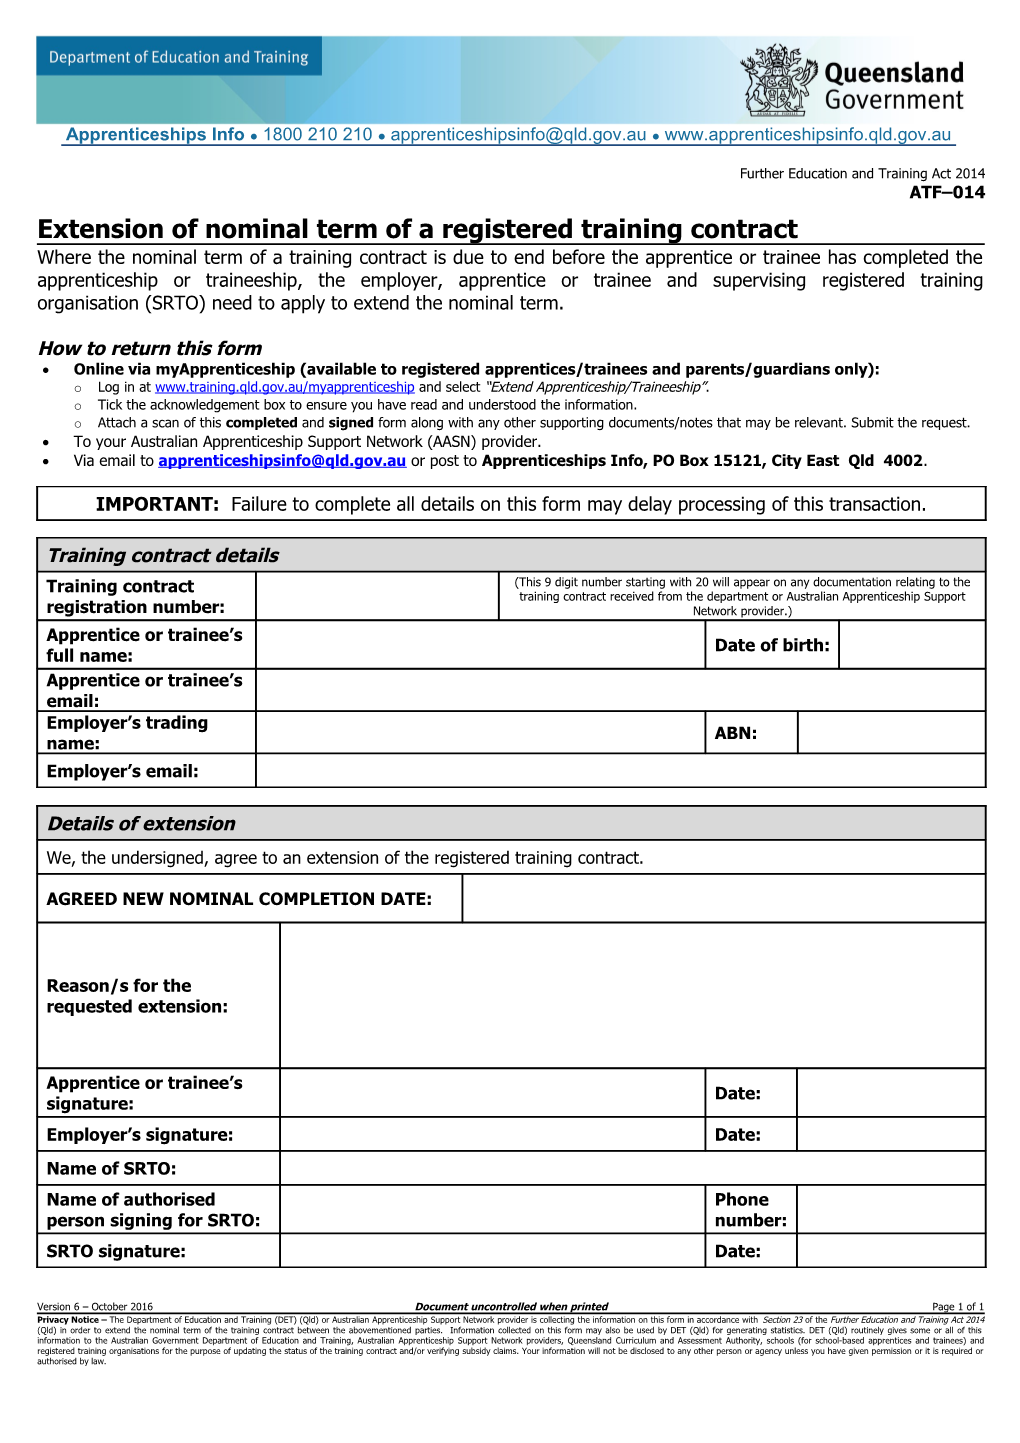 ATF-014 Extension of Nominal Term of a Registered Form